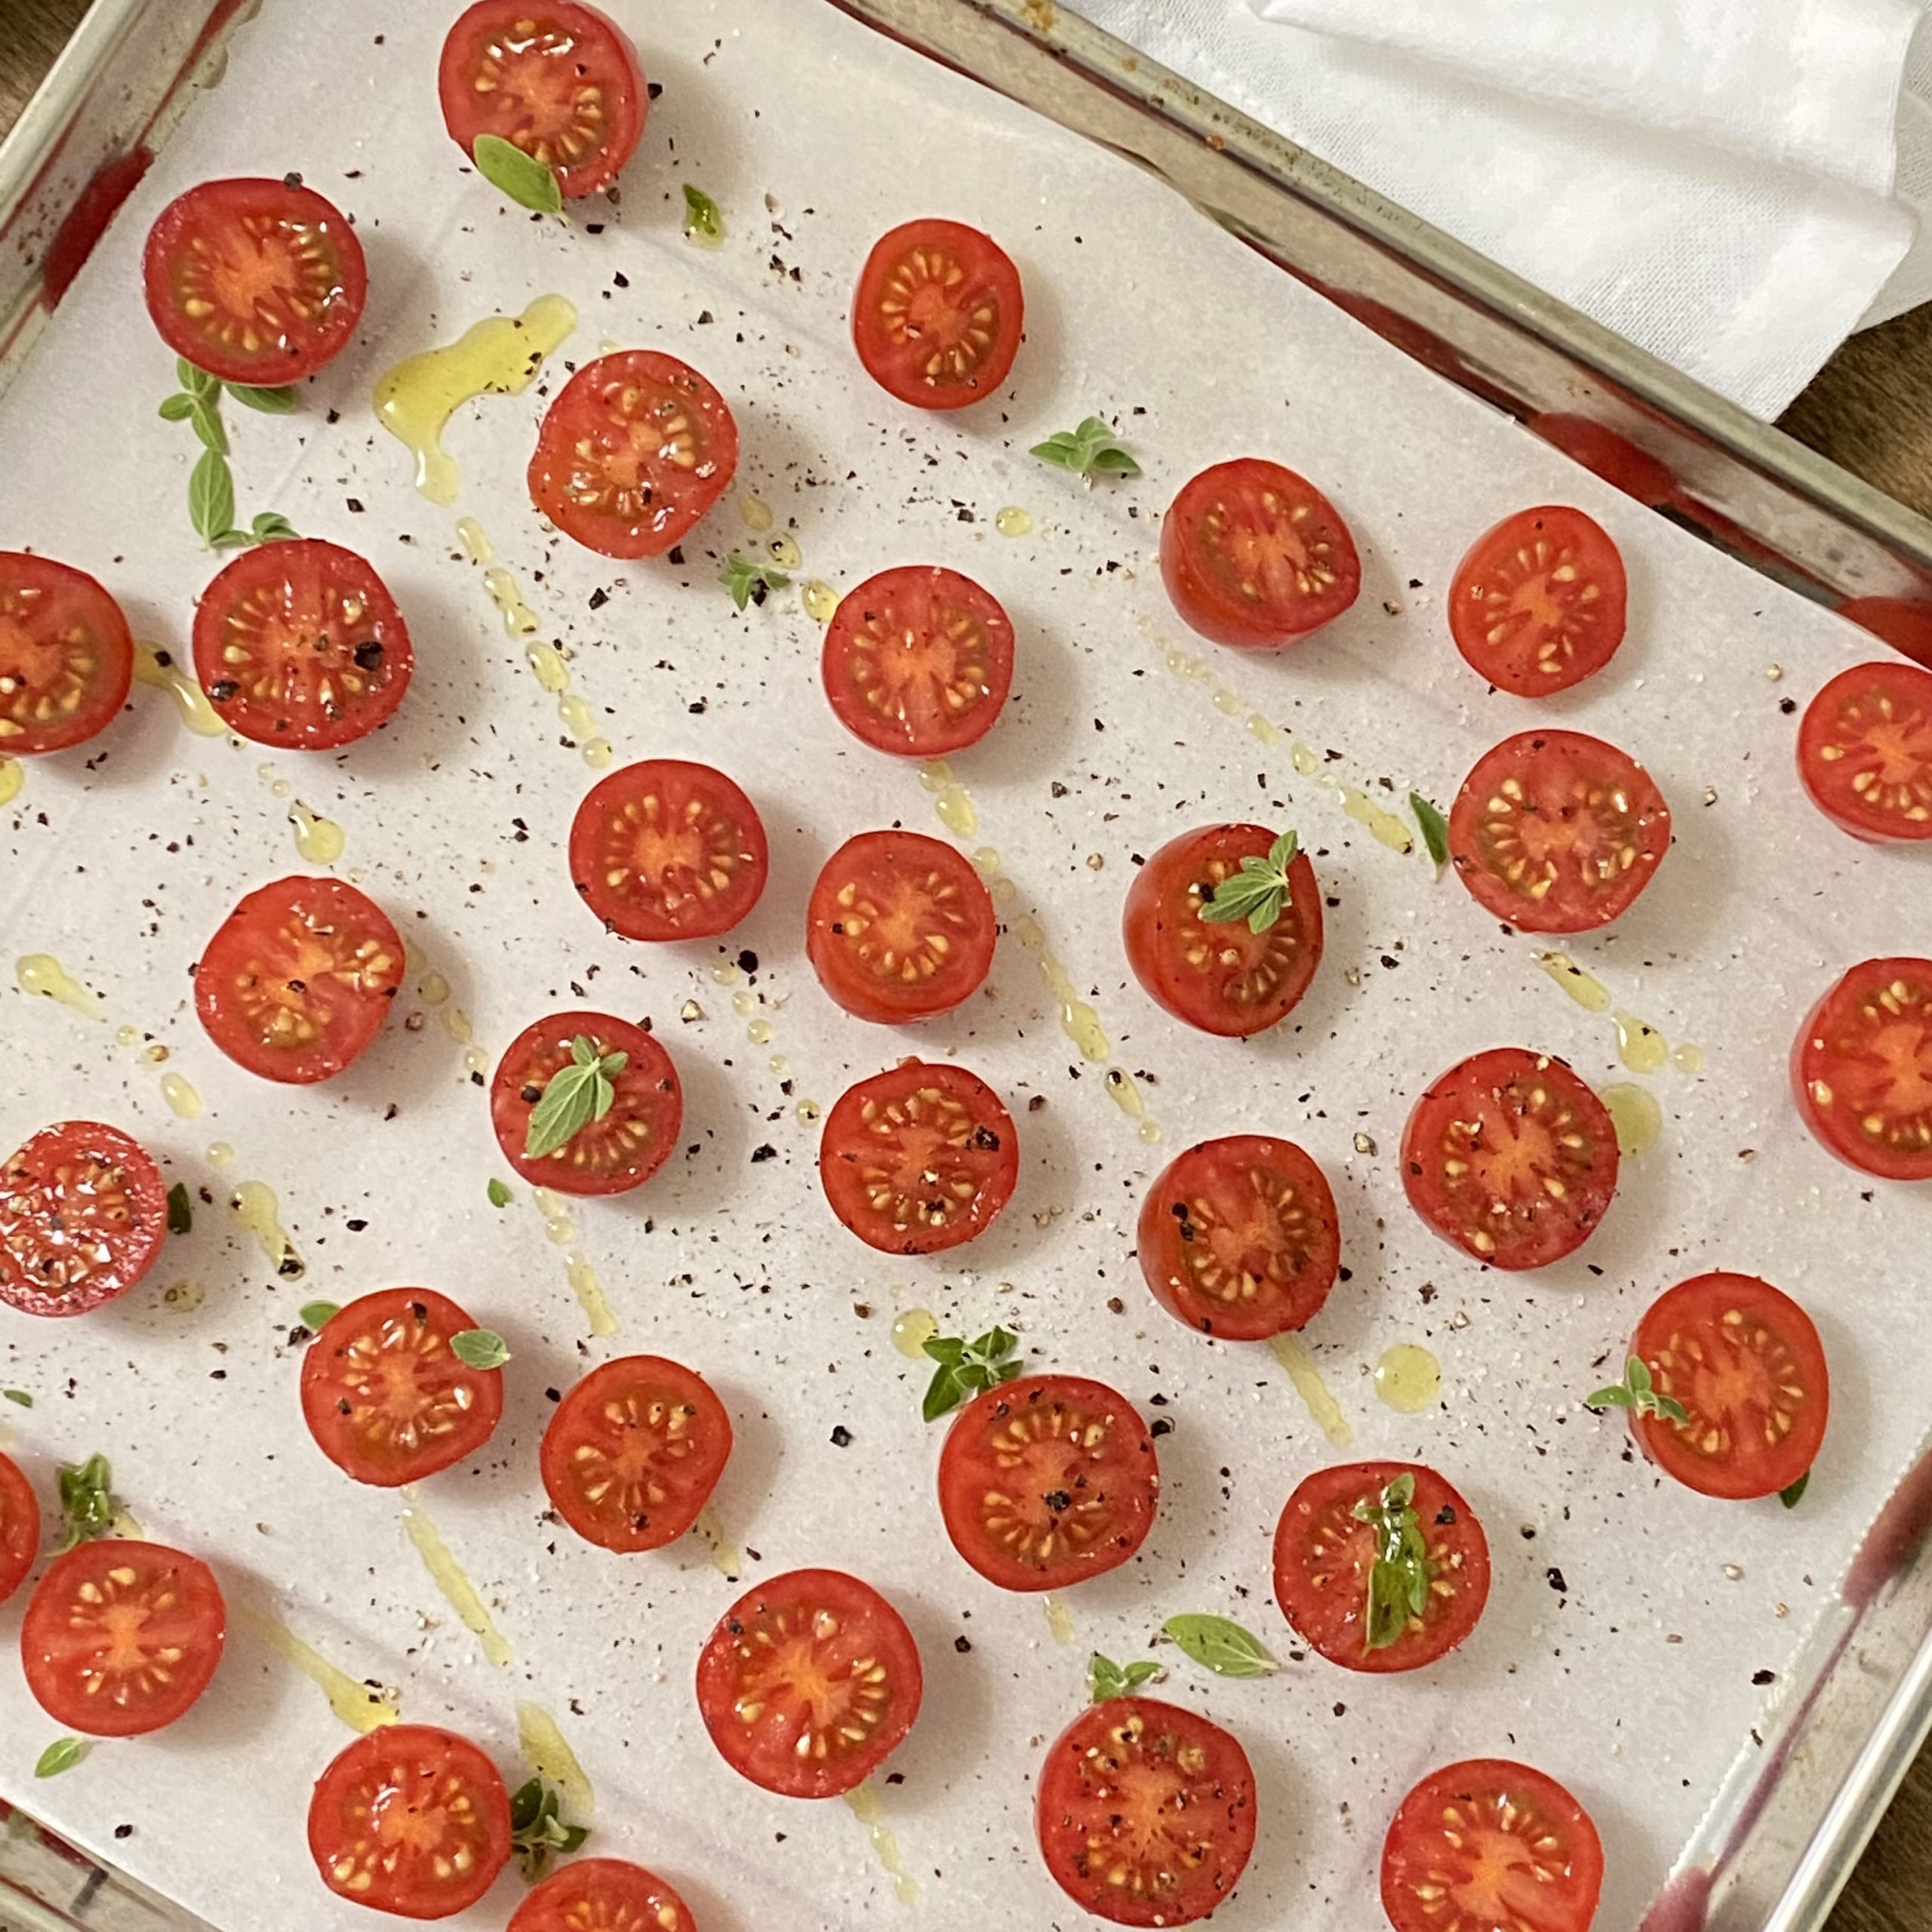 Cherry tomatoes on a baking sheet lined with parchment drizzled with olive oil, salt, pepper, and oregano leaves.